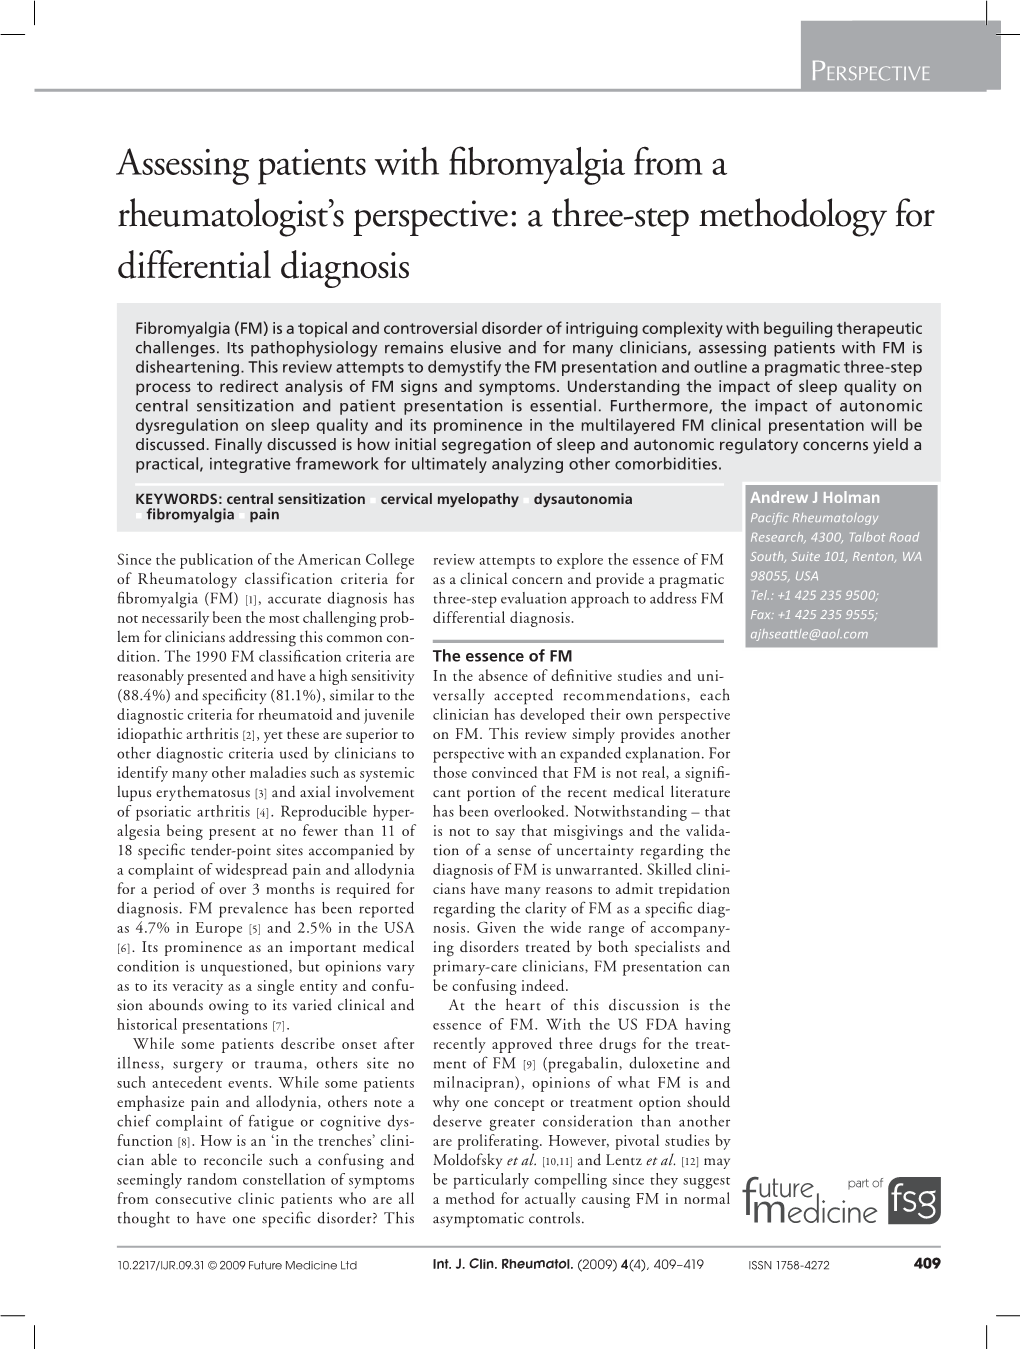 Assessing Patients with Fibromyalgia from a Rheumatologist's Perspective